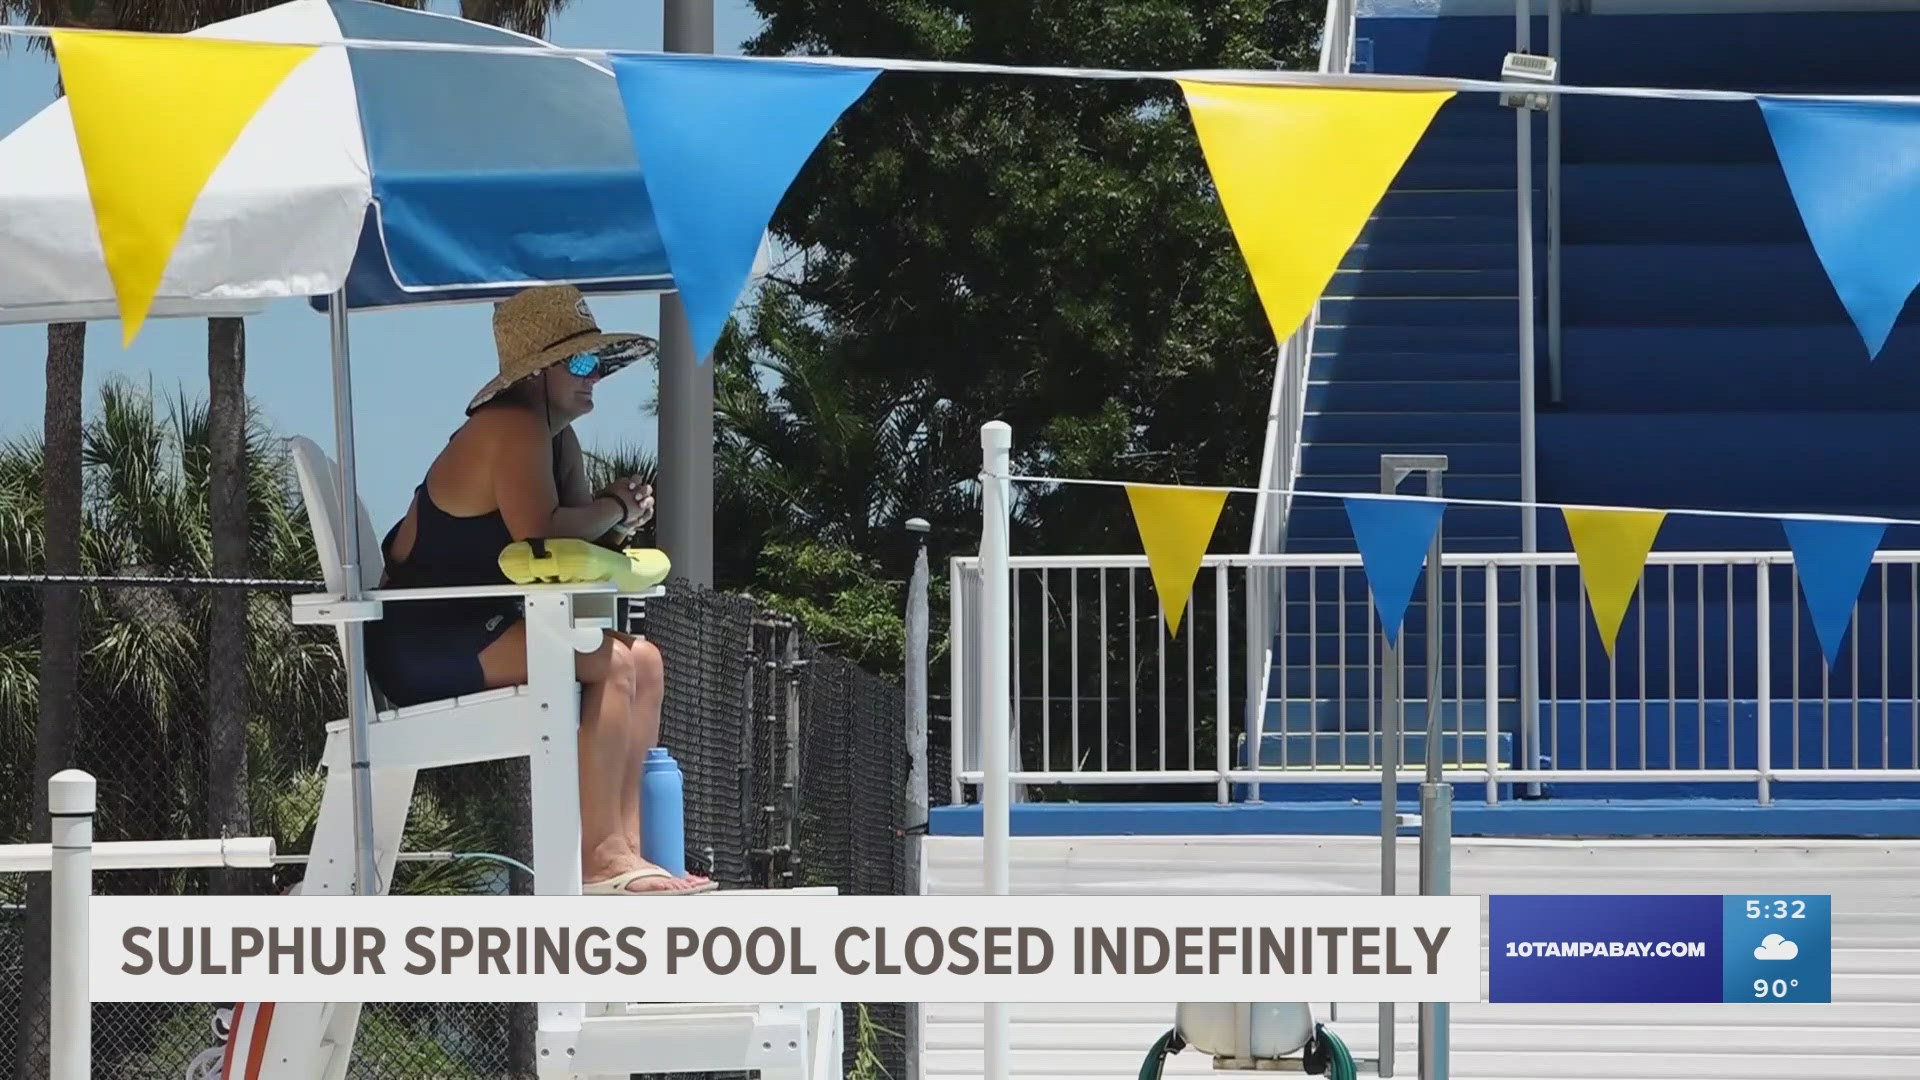 The city of Tampa decided to close the pool indefinitely after discovering problems that could pose a hazard.